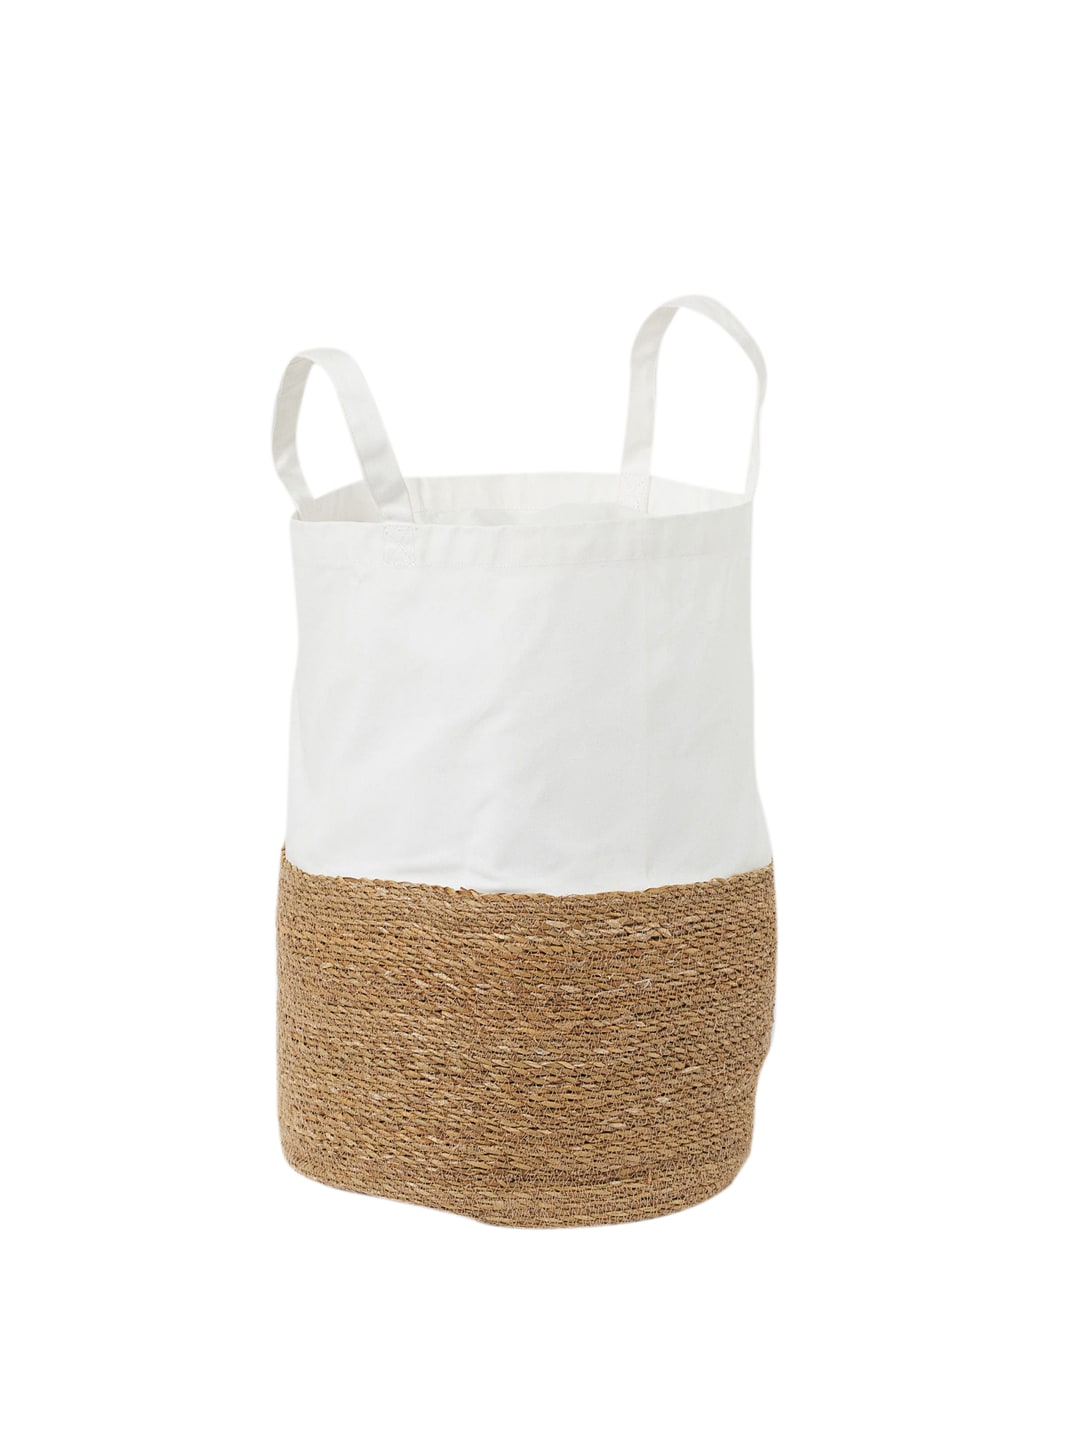 H&M White & Beige Colourblocked Cotton Twill Laundry Bag Price in India